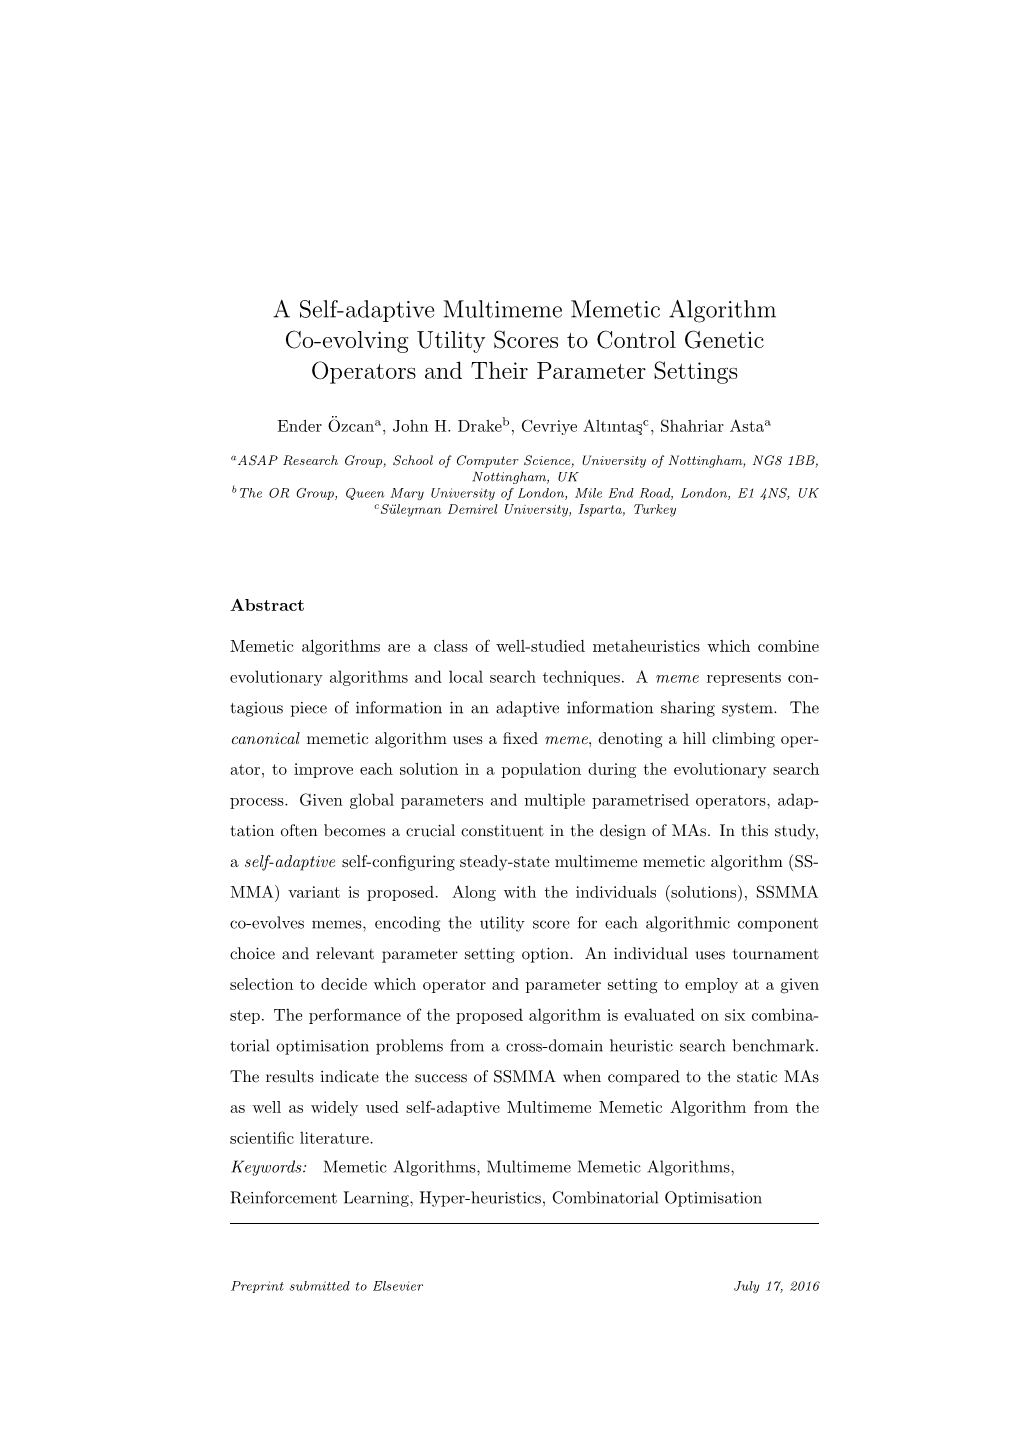 A Self-Adaptive Multimeme Memetic Algorithm Co-Evolving Utility Scores to Control Genetic Operators and Their Parameter Settings